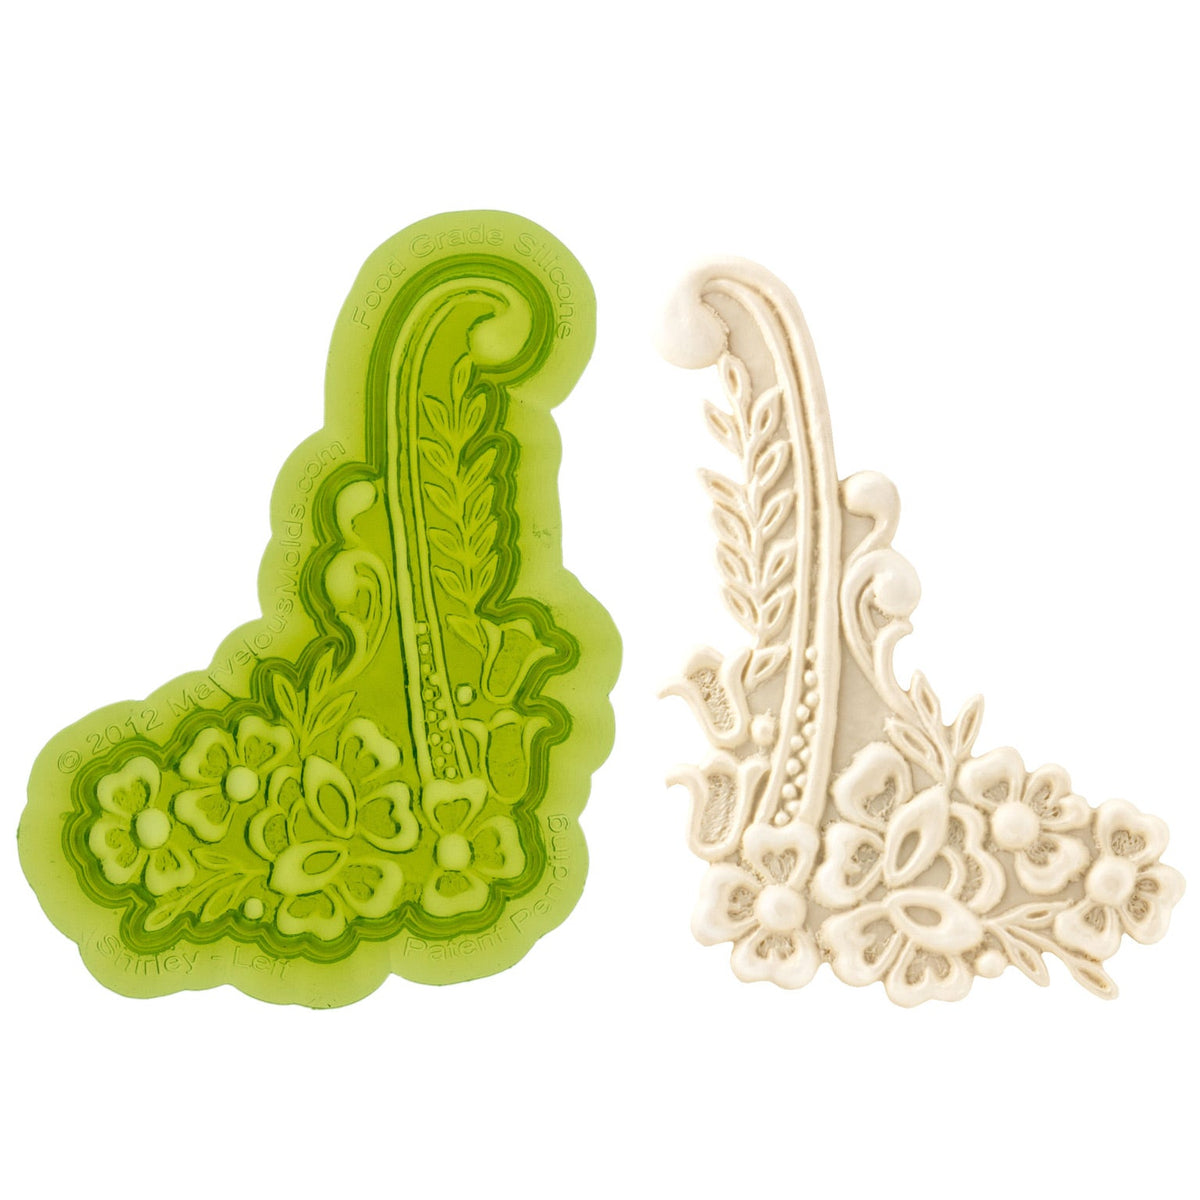 Casting and Product Image of Shirley Left Lace Silicone Mold, for Fondant Cake Decorating by Marvelous Molds